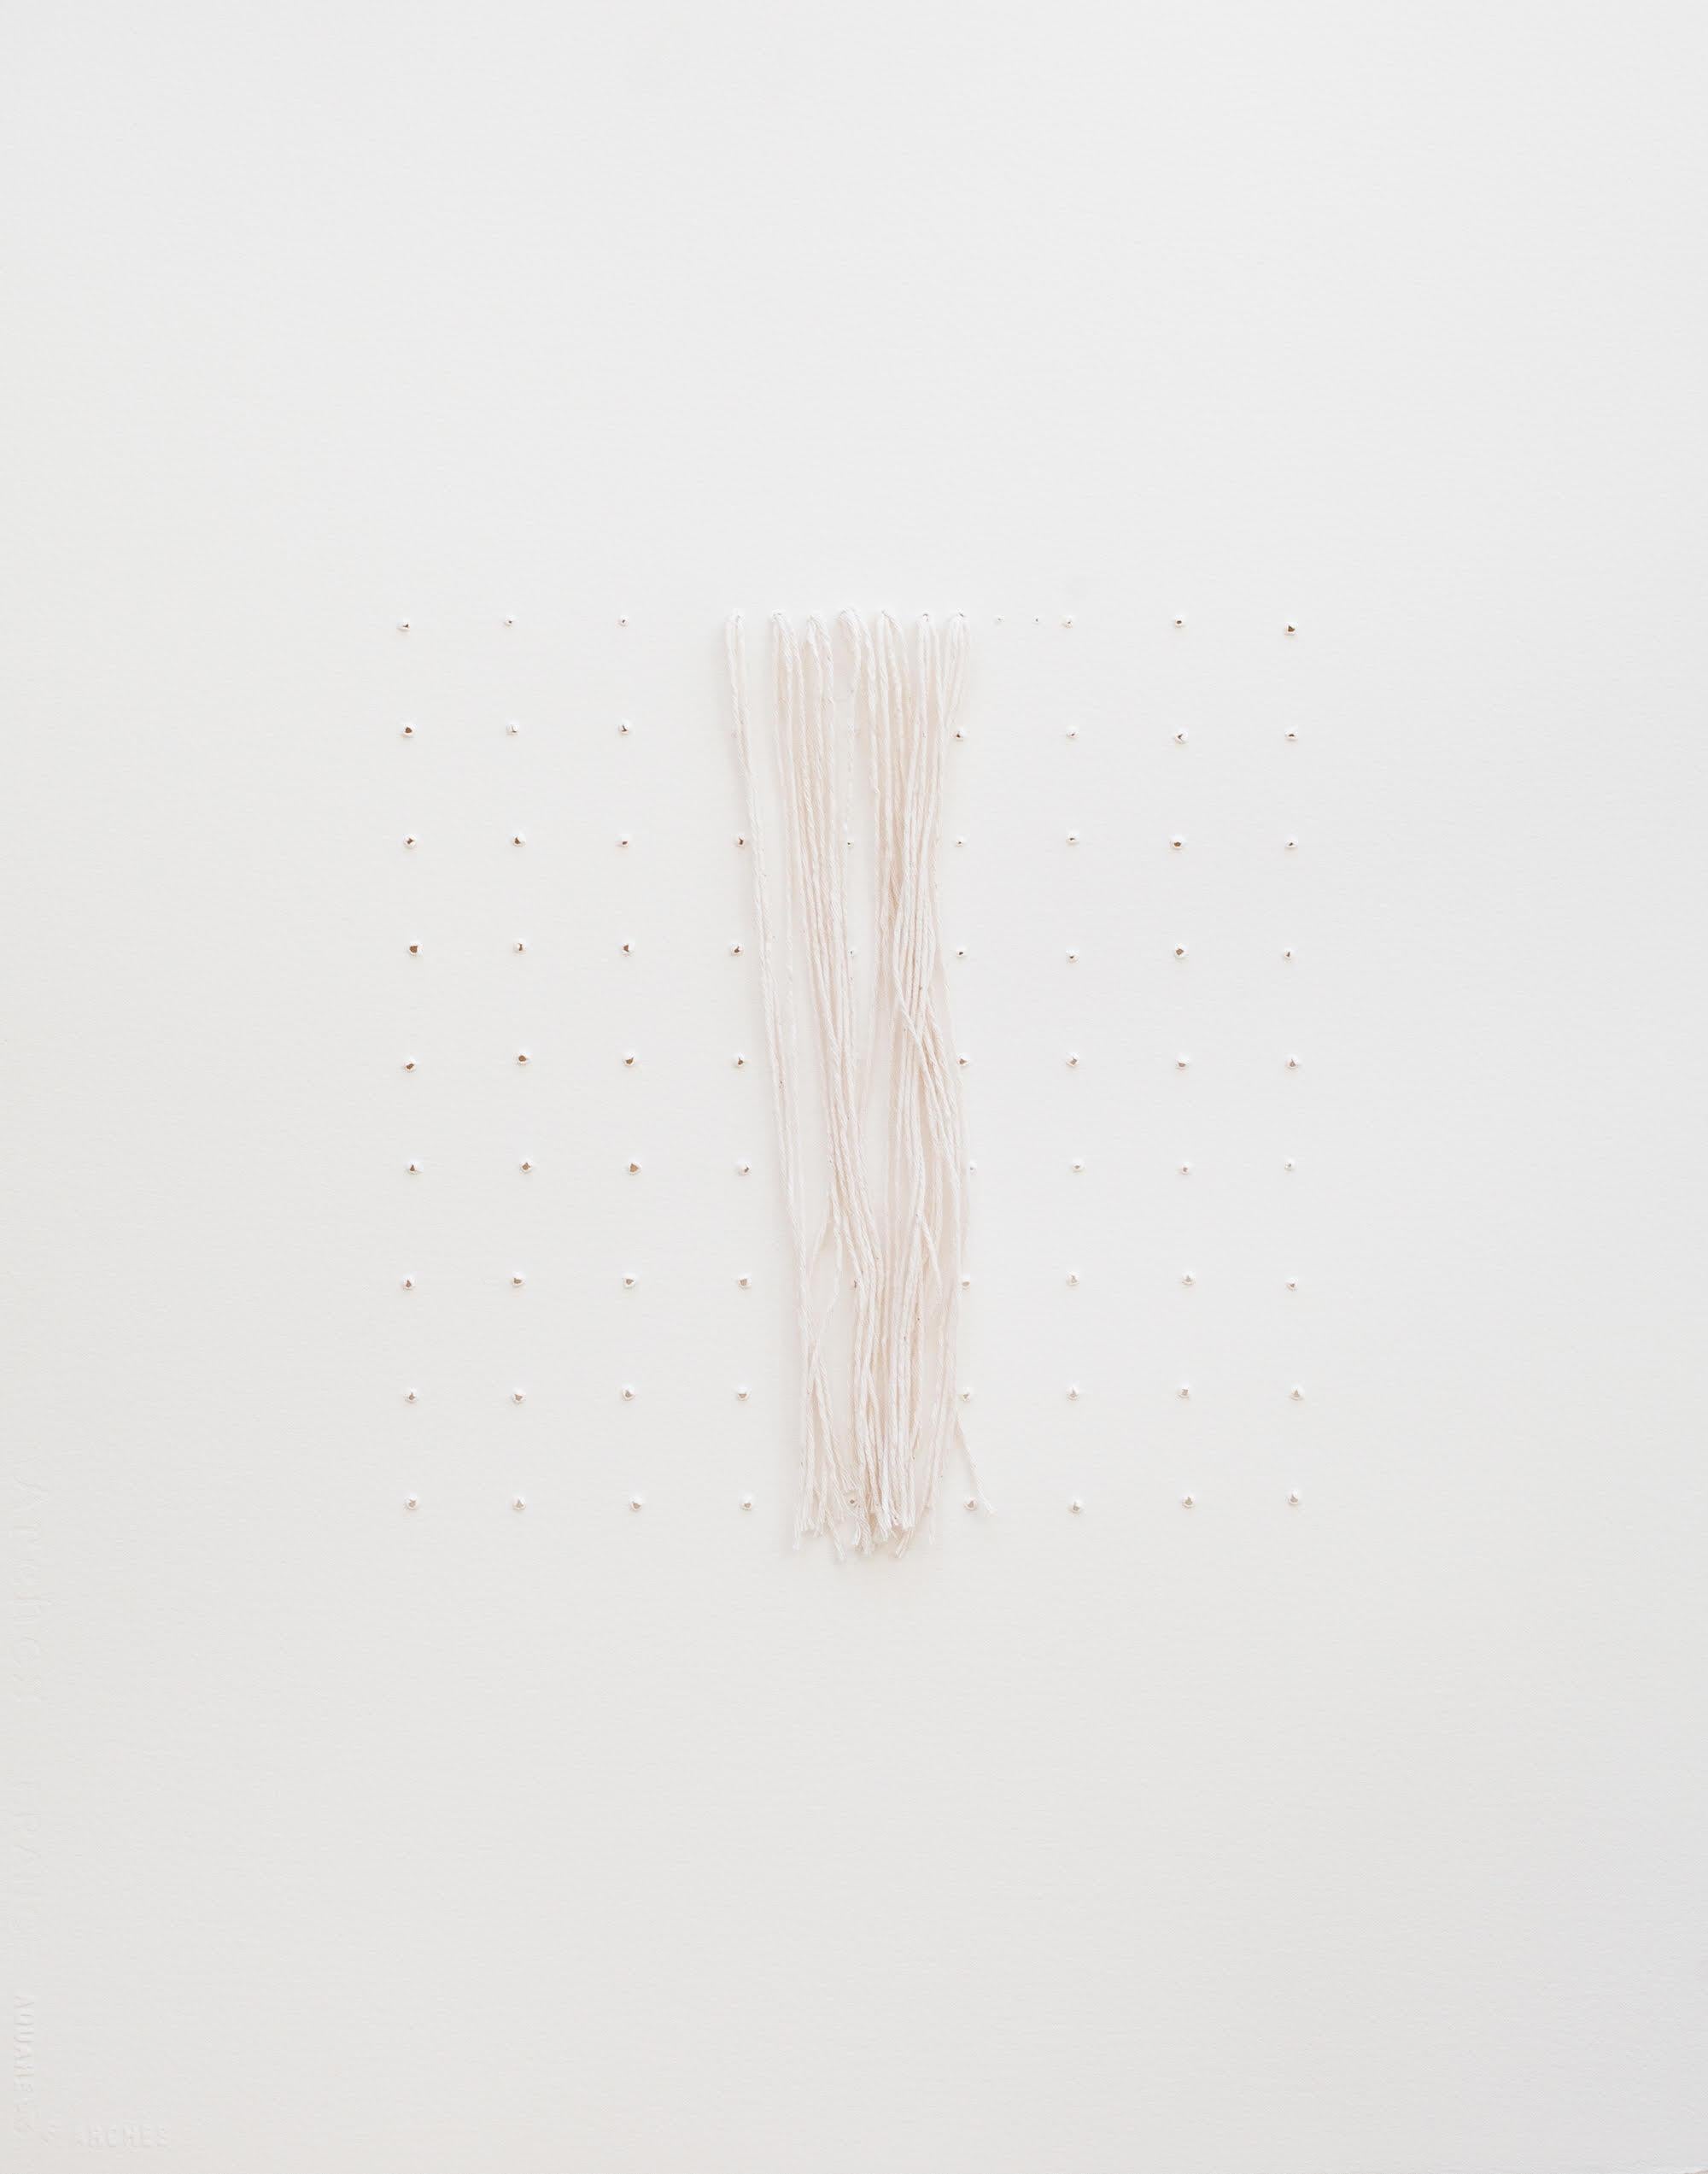 Untitled, Grids and Threads - Mixed Media Art by Bastienne Schmidt